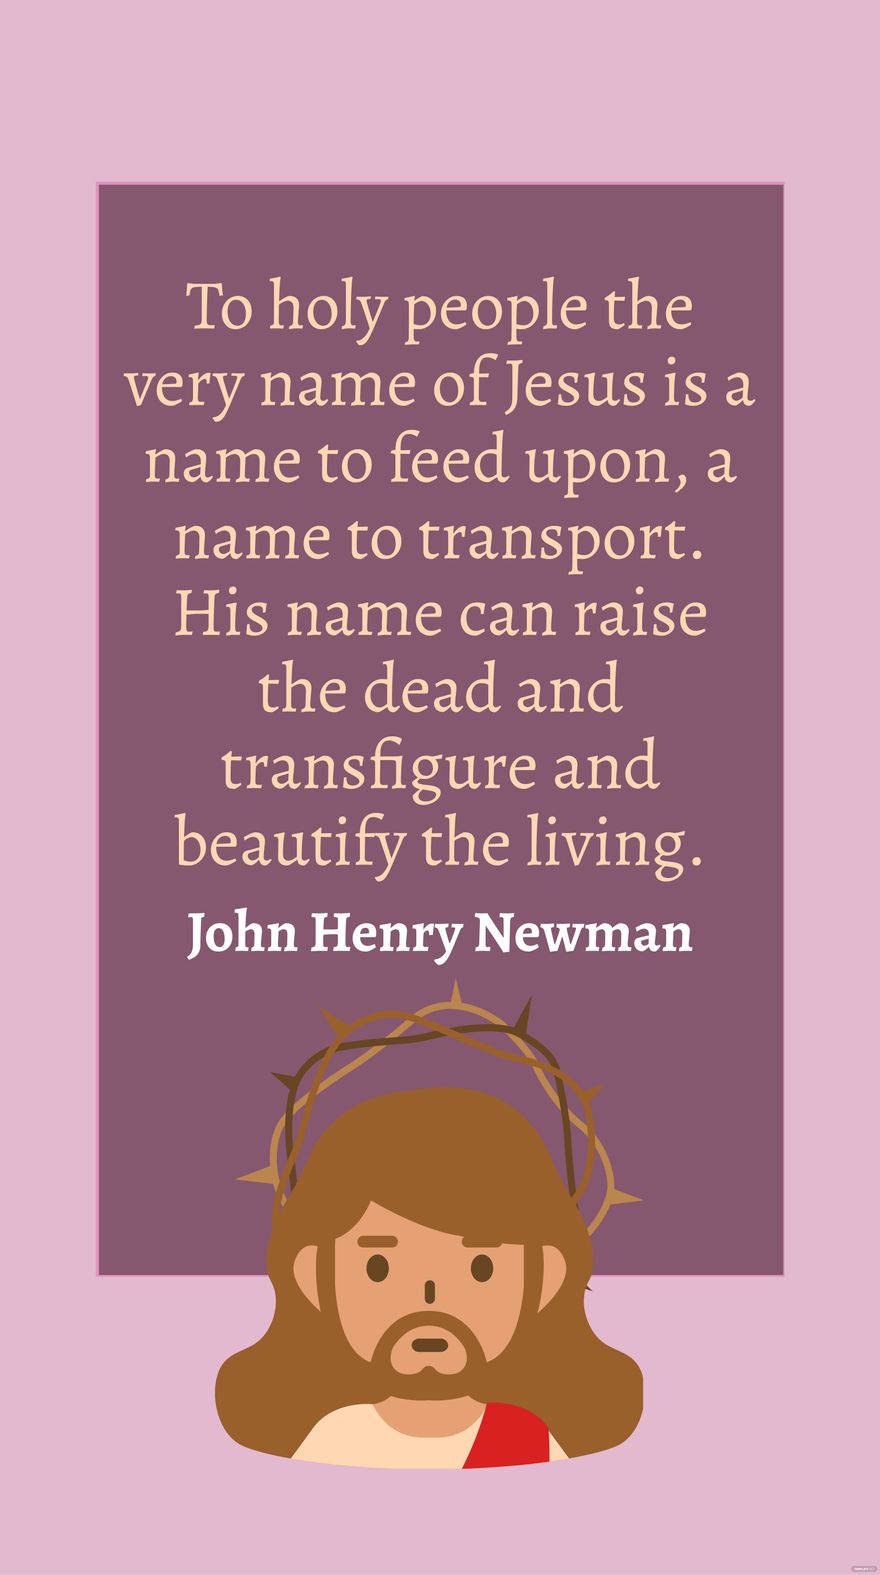 Free John Henry Newman - To holy people the very name of Jesus is a name to feed upon, a name to transport. His name can raise the dead and transfigure and beautify the living.